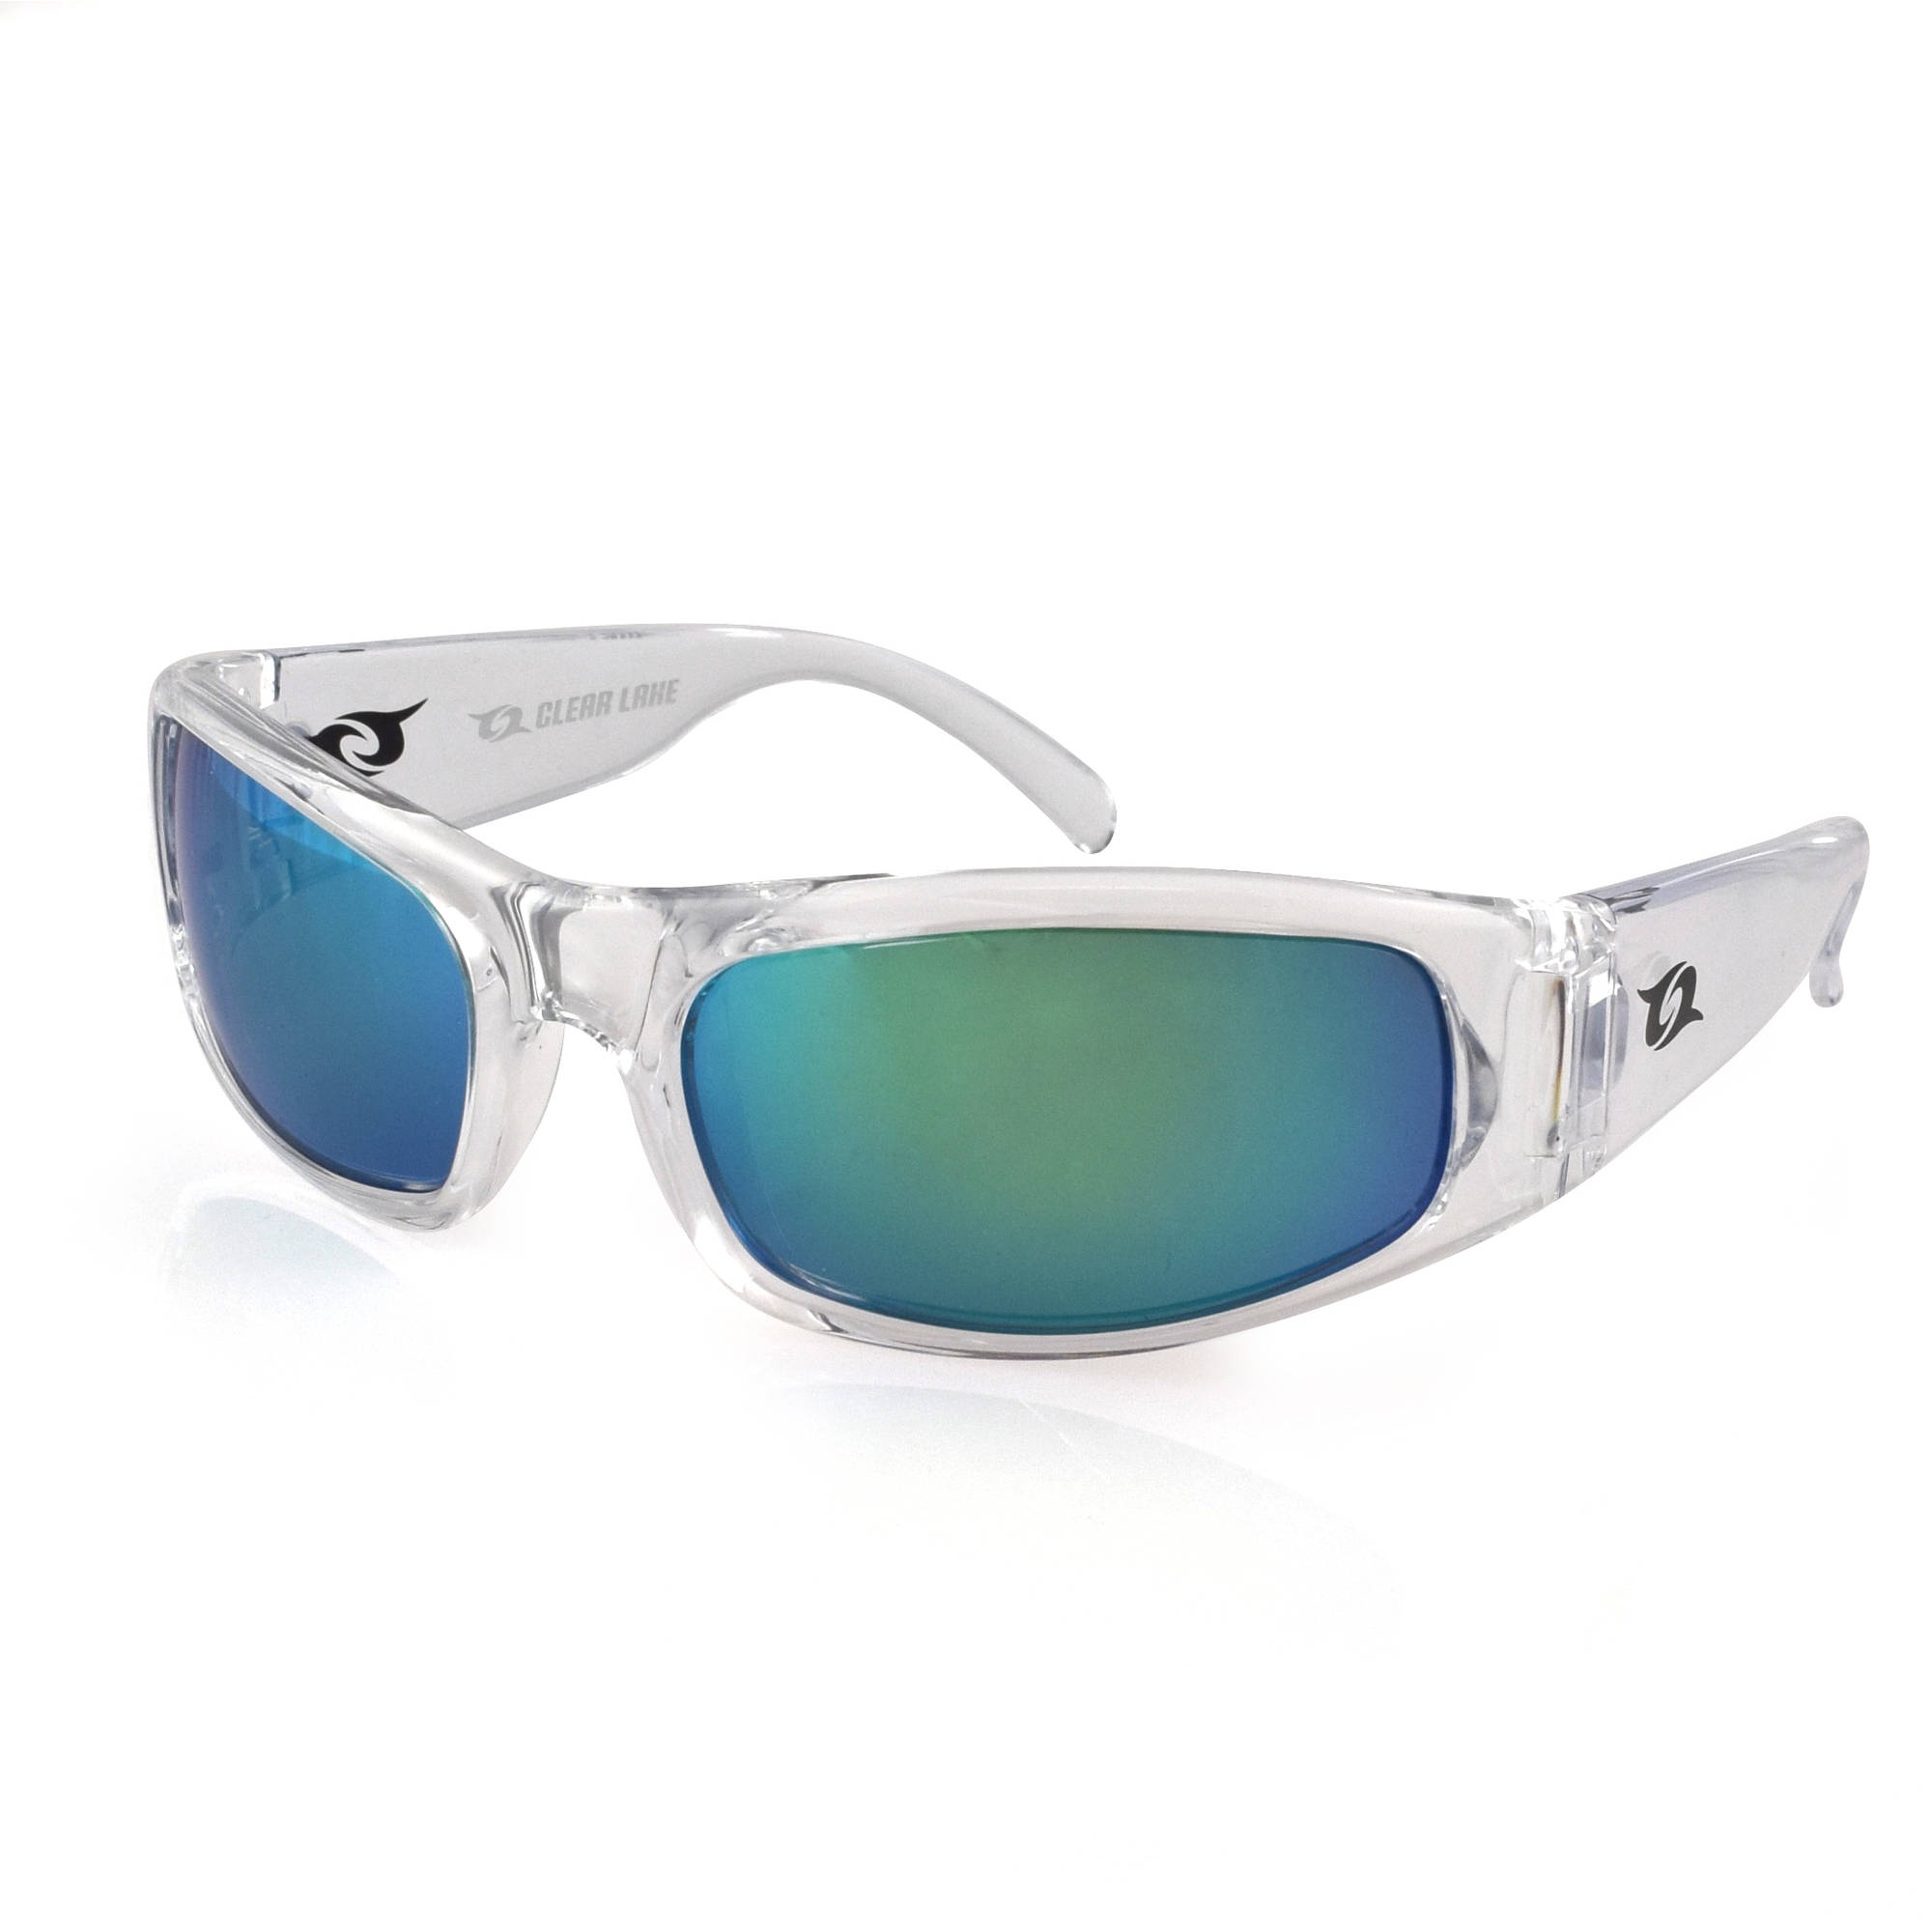 Clear Lake Manatee Clear Frame Sunglasses, Smoke Polarized Lens with Green Mirror - image 1 of 1